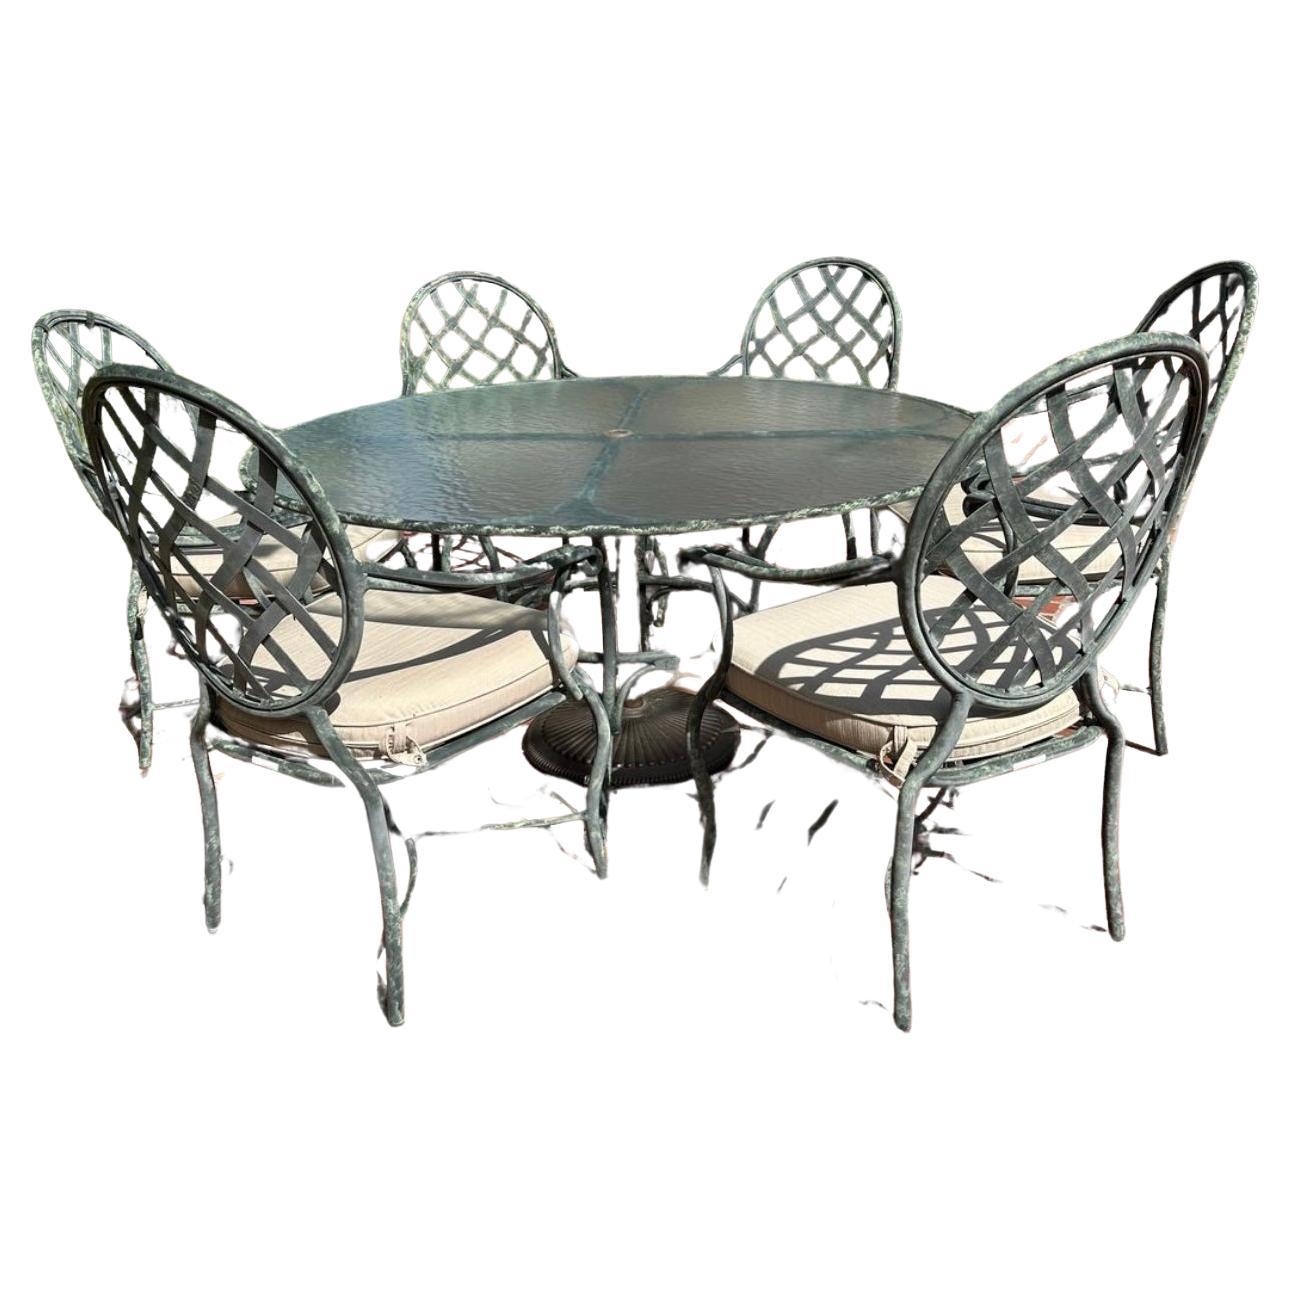 Brown Jordan outdoor Dining set, glass top table and 6 armchairs, Made in USA